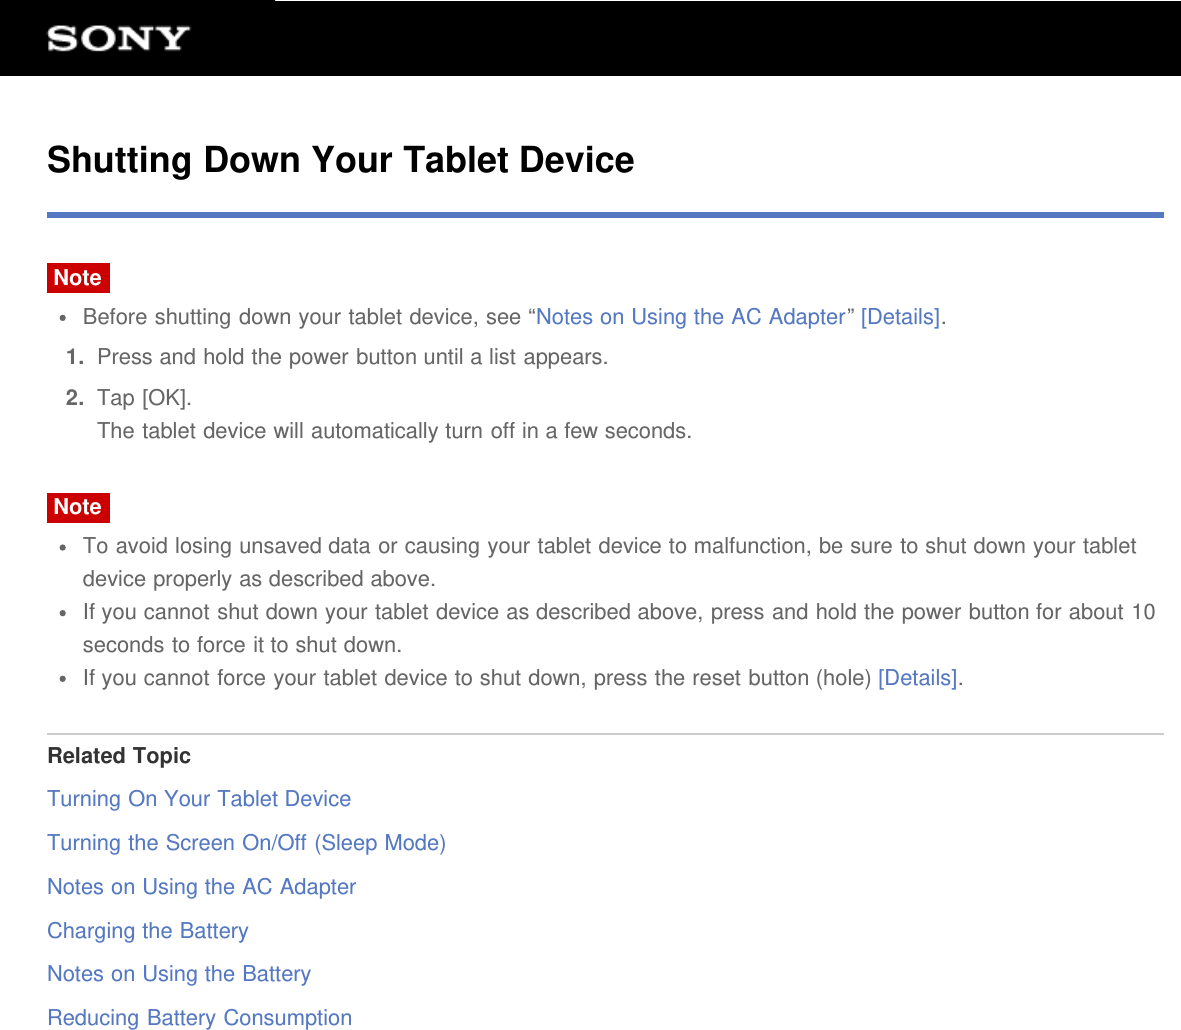 Shutting Down Your Tablet DeviceNoteBefore shutting down your tablet device, see “Notes on Using the AC Adapter” [Details].1.  Press and hold the power button until a list appears.2.  Tap [OK].The tablet device will automatically turn off in a few seconds.NoteTo avoid losing unsaved data or causing your tablet device to malfunction, be sure to shut down your tabletdevice properly as described above.If you cannot shut down your tablet device as described above, press and hold the power button for about 10seconds to force it to shut down.If you cannot force your tablet device to shut down, press the reset button (hole) [Details].Related TopicTurning On Your Tablet DeviceTurning the Screen On/Off (Sleep Mode)Notes on Using the AC AdapterCharging the BatteryNotes on Using the BatteryReducing Battery Consumption